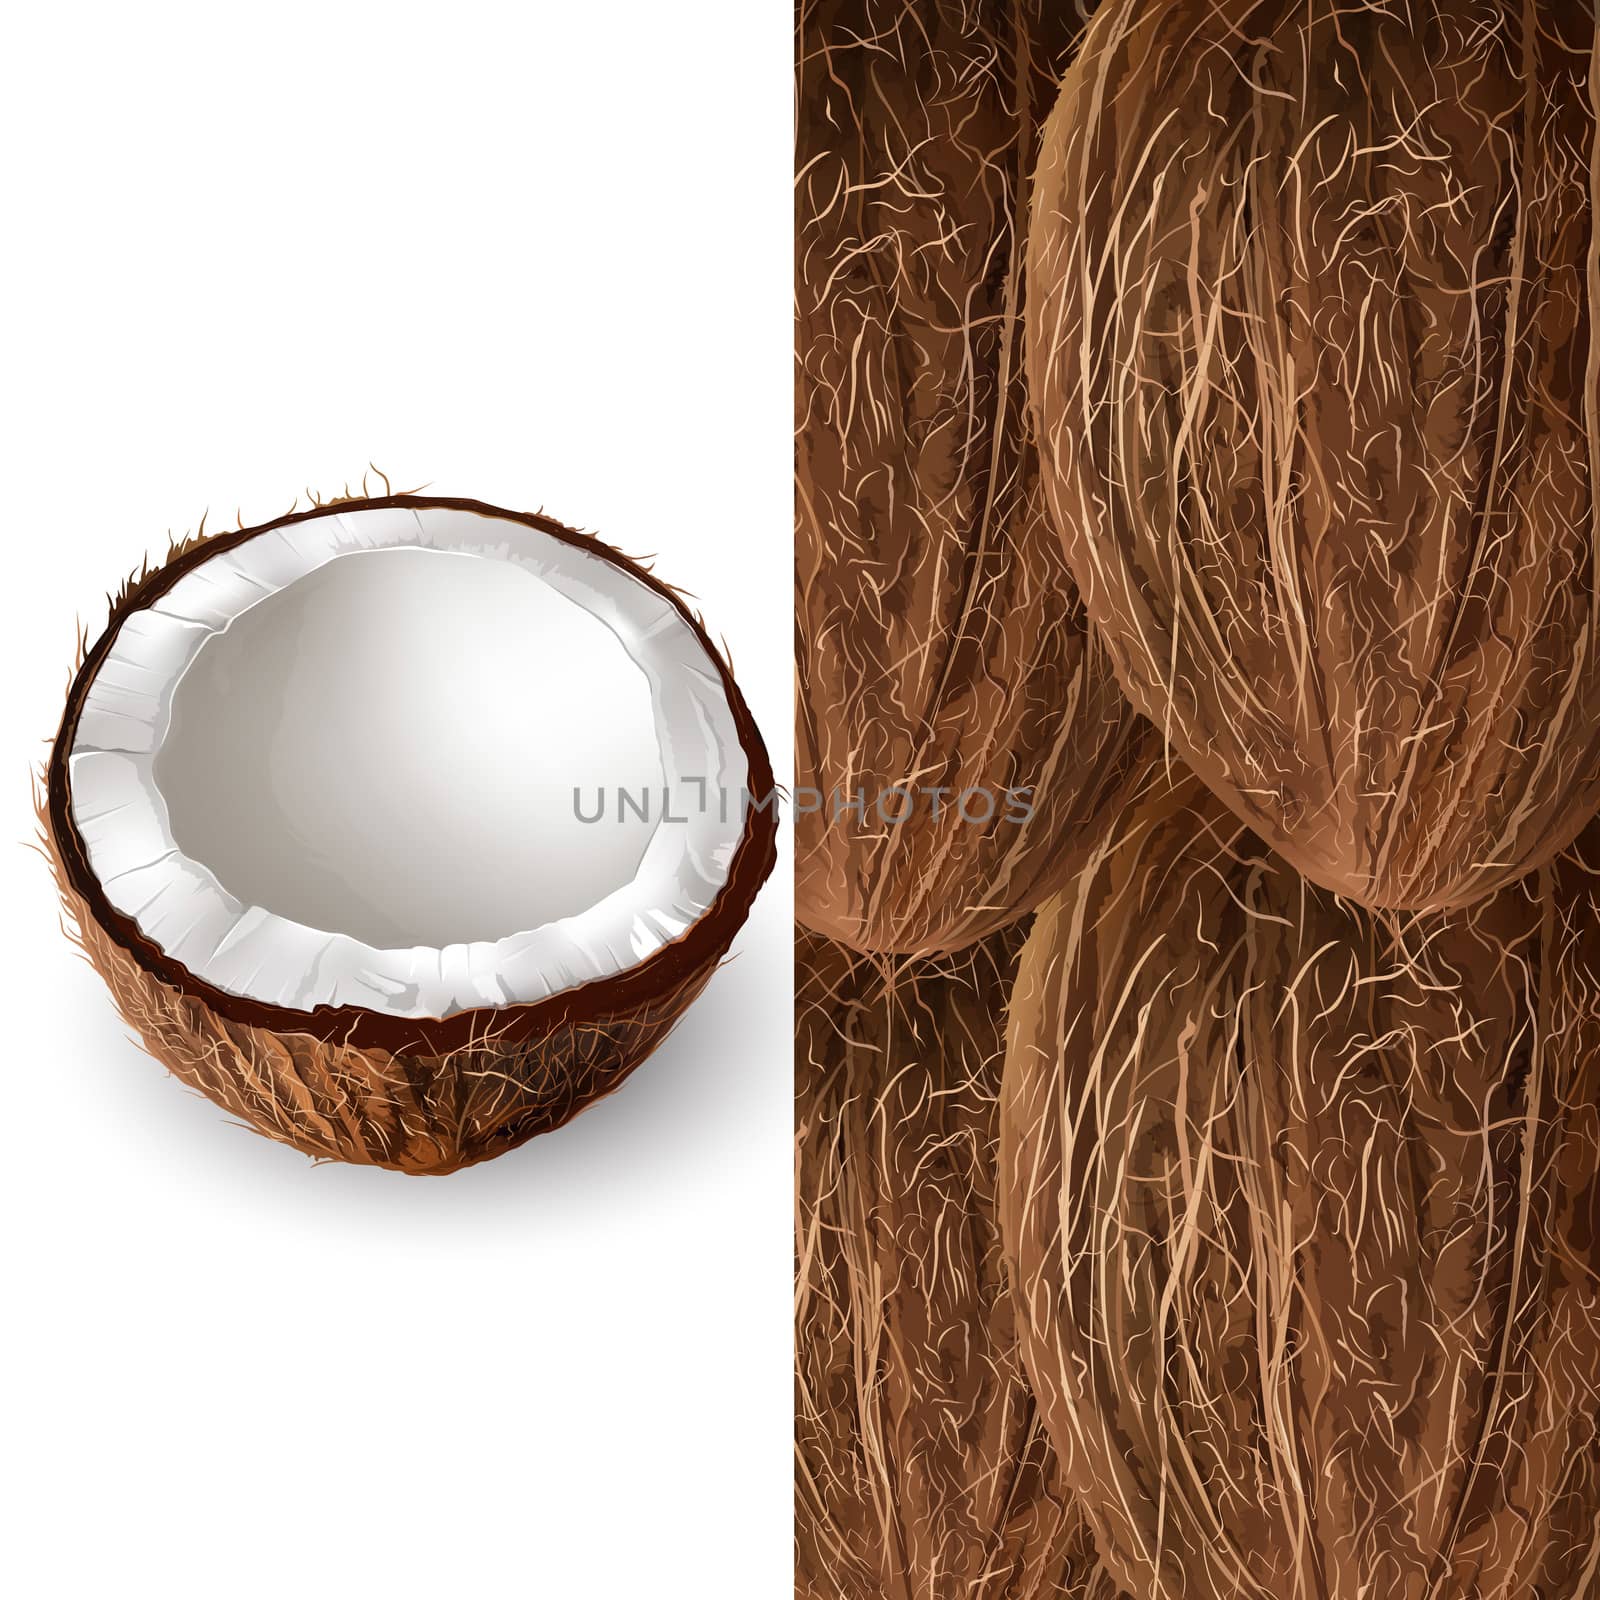 Coconut on a brown and white by ConceptCafe